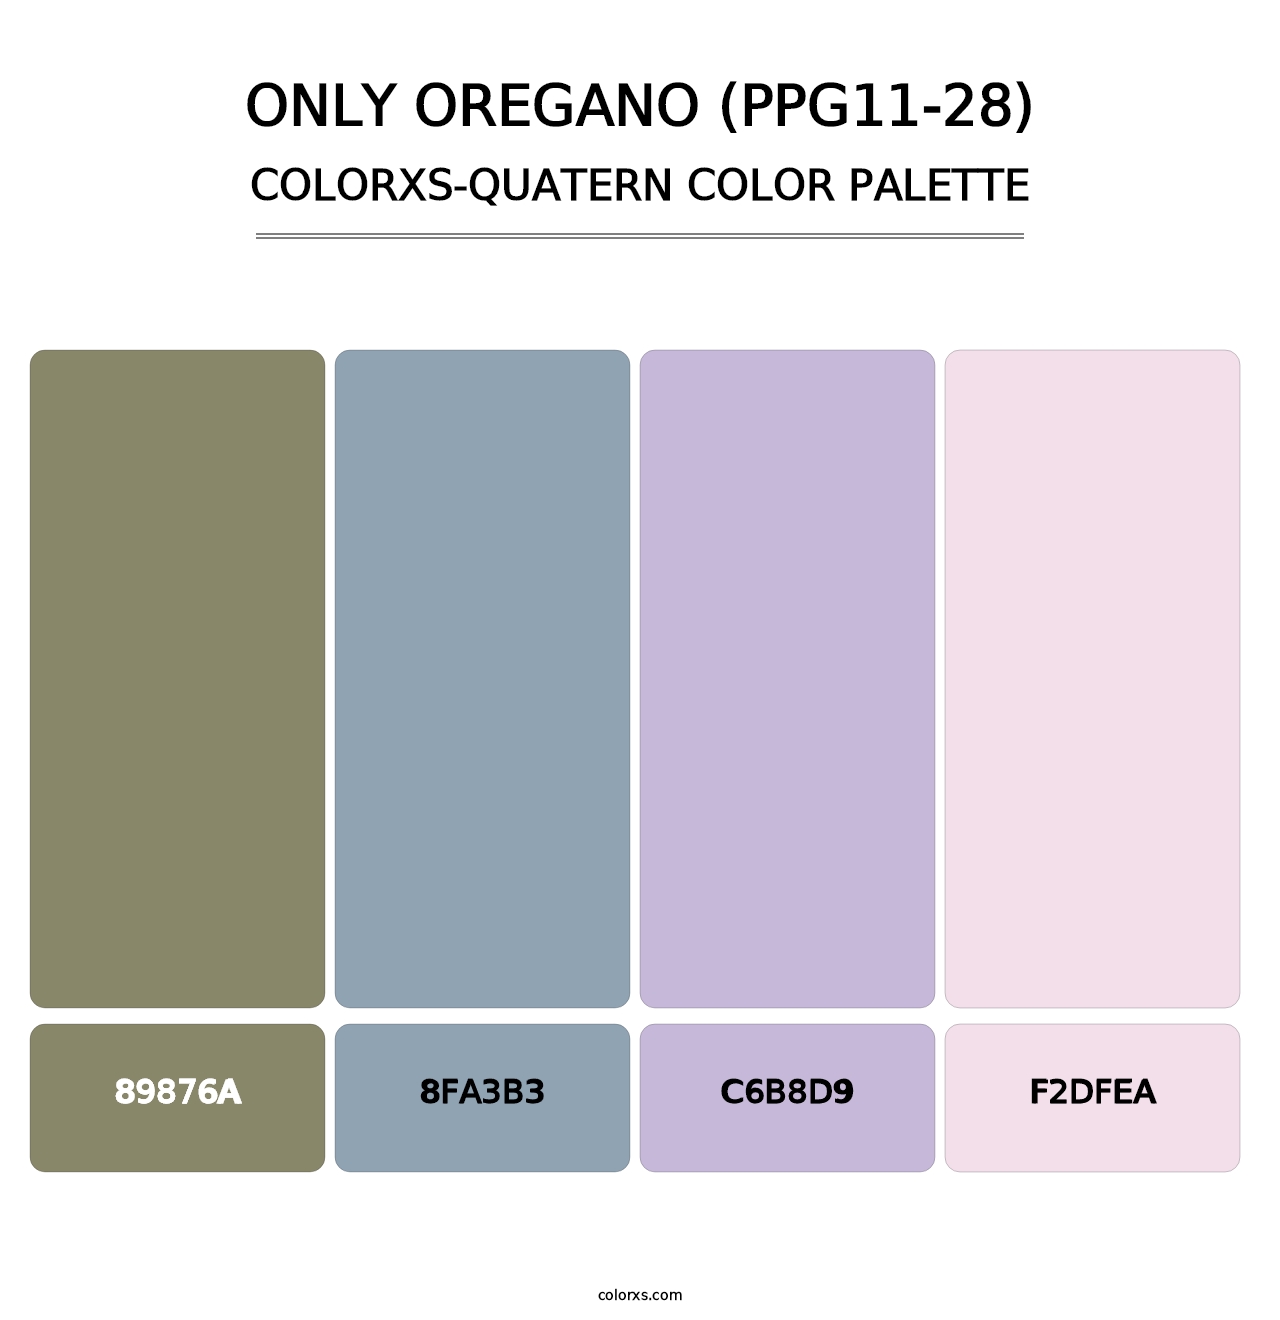 Only Oregano (PPG11-28) - Colorxs Quatern Palette